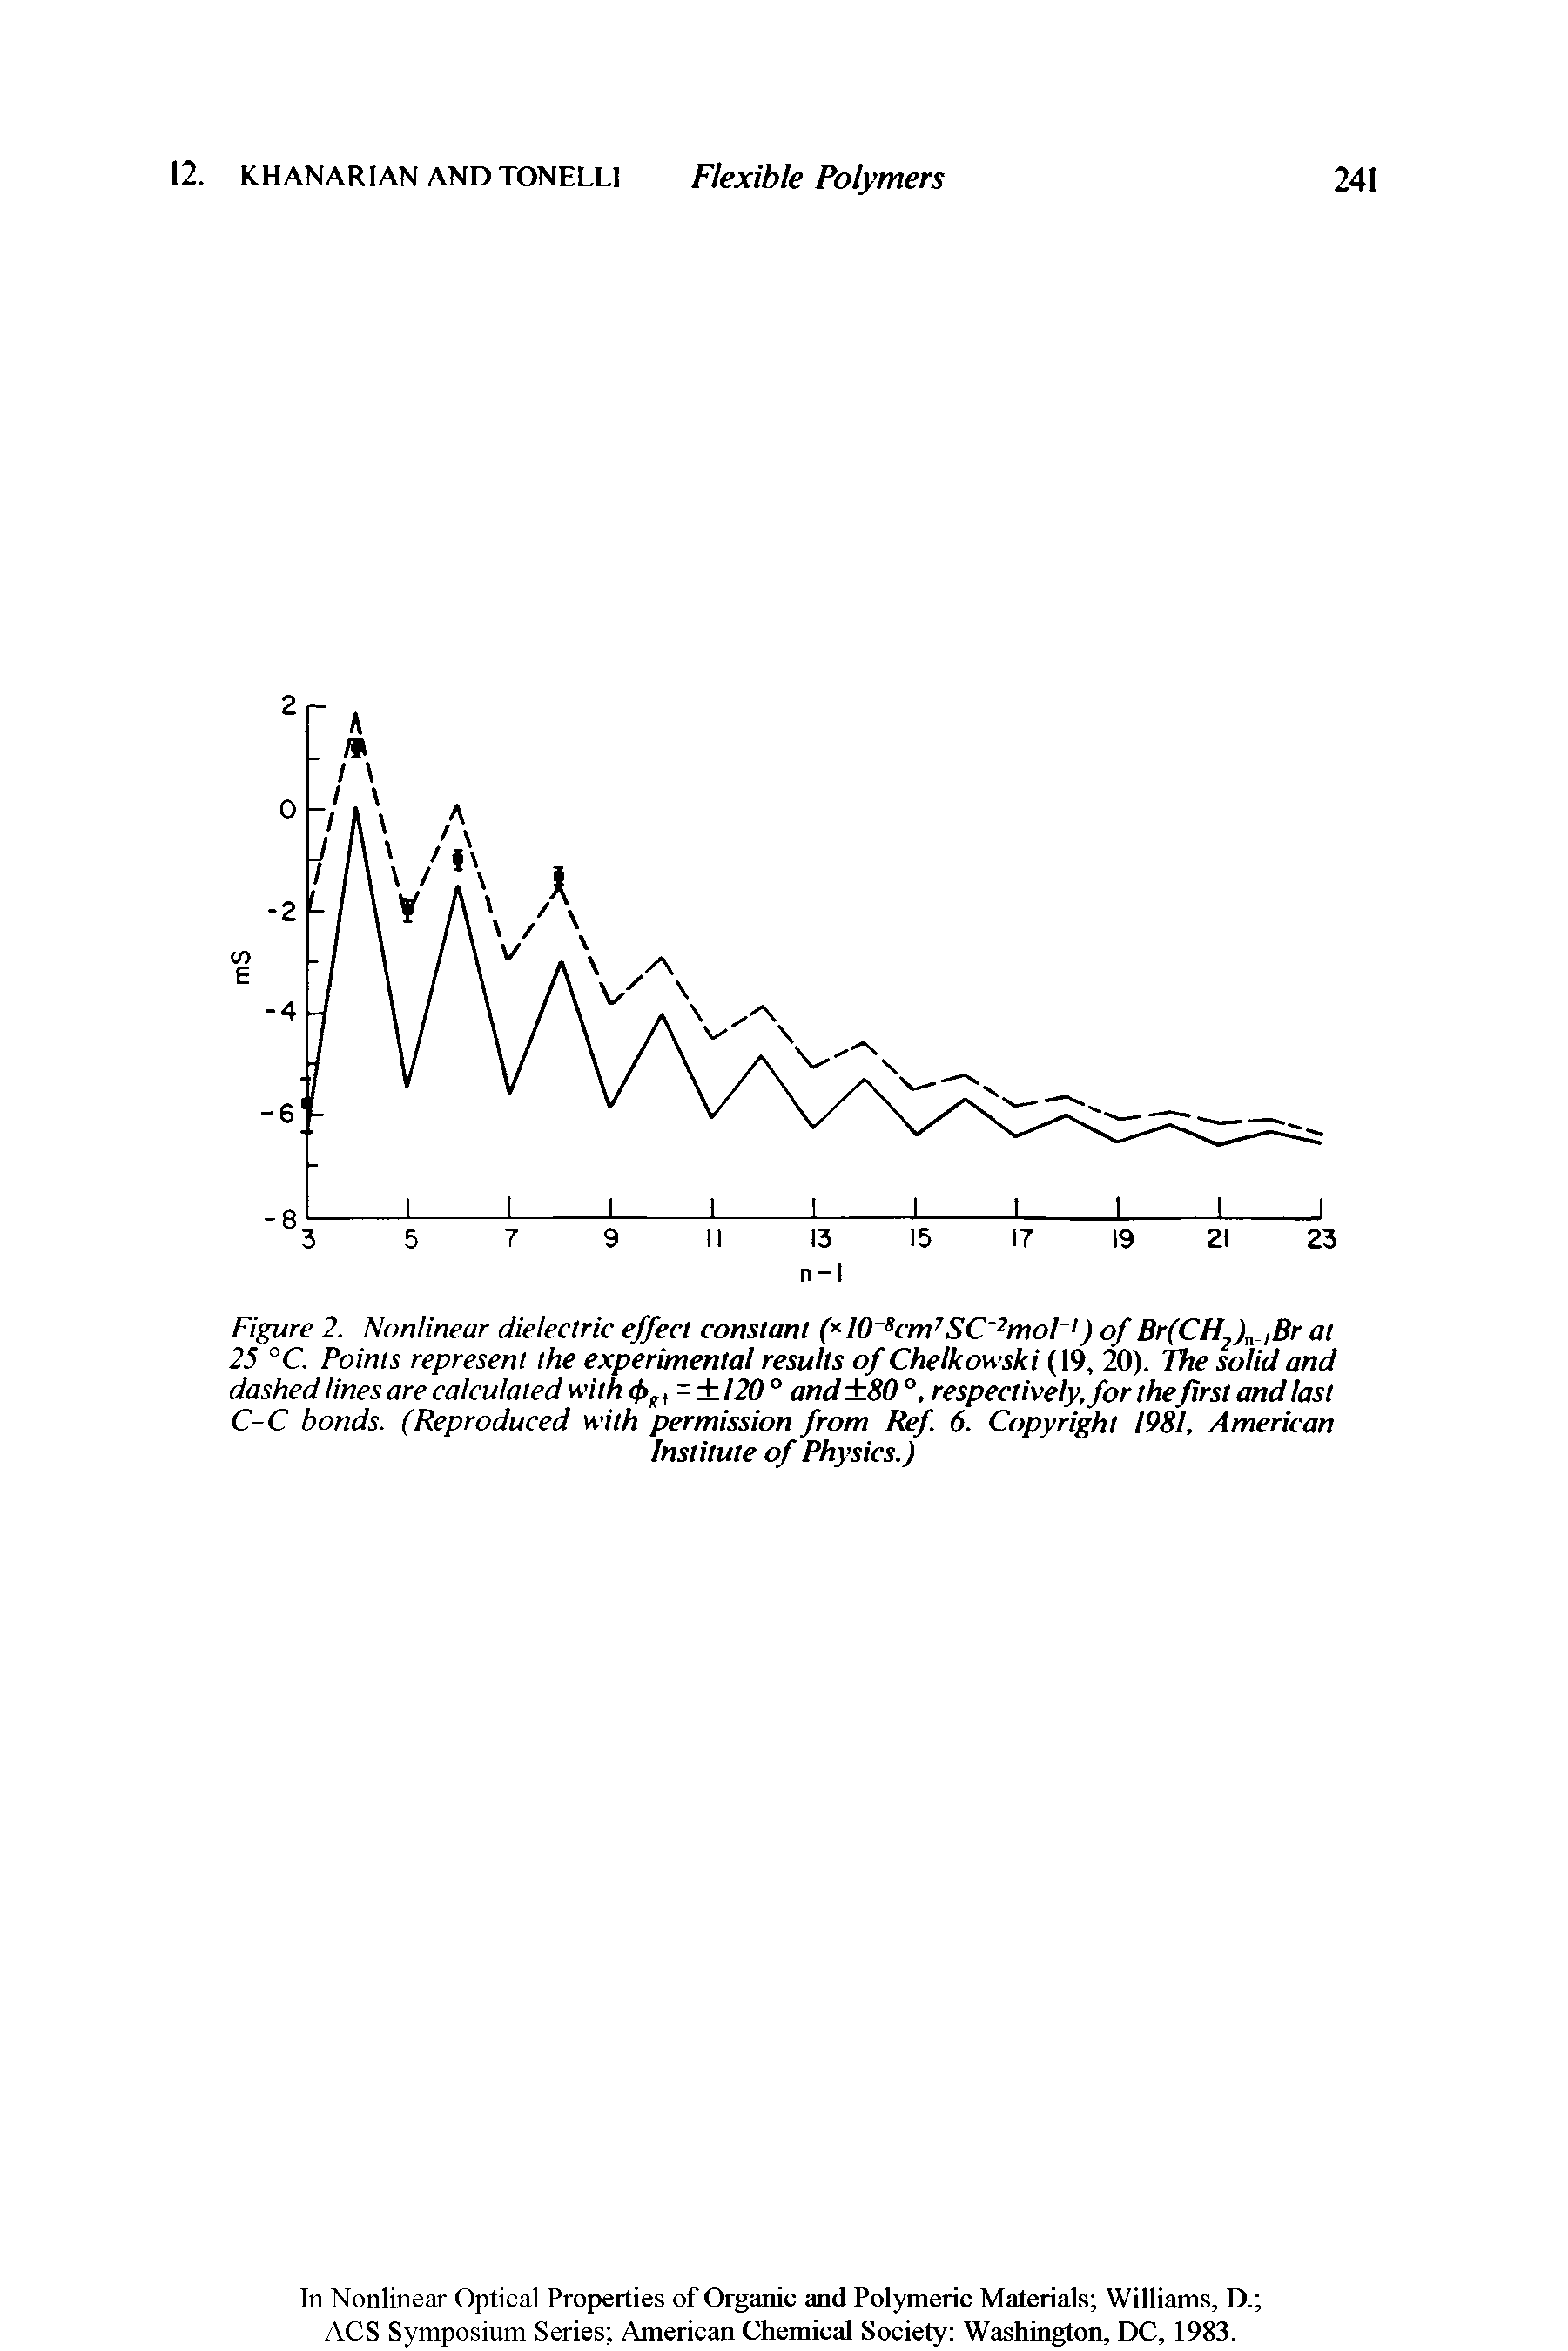 Figure 2. Nonlinear dielectric effect constant ( 10 scm7SC 2moF ) of Br(CH2)n, Br at 25 °C. Points represent the experimental results of Chelkowski (19, 20). The solid and dashed lines are calculated with 4>s, = 120 ° and +80 °, respectively, for thefirst and last C-C bonds. (Reproduced with permission from Ref 6. Copyright 1981, American...